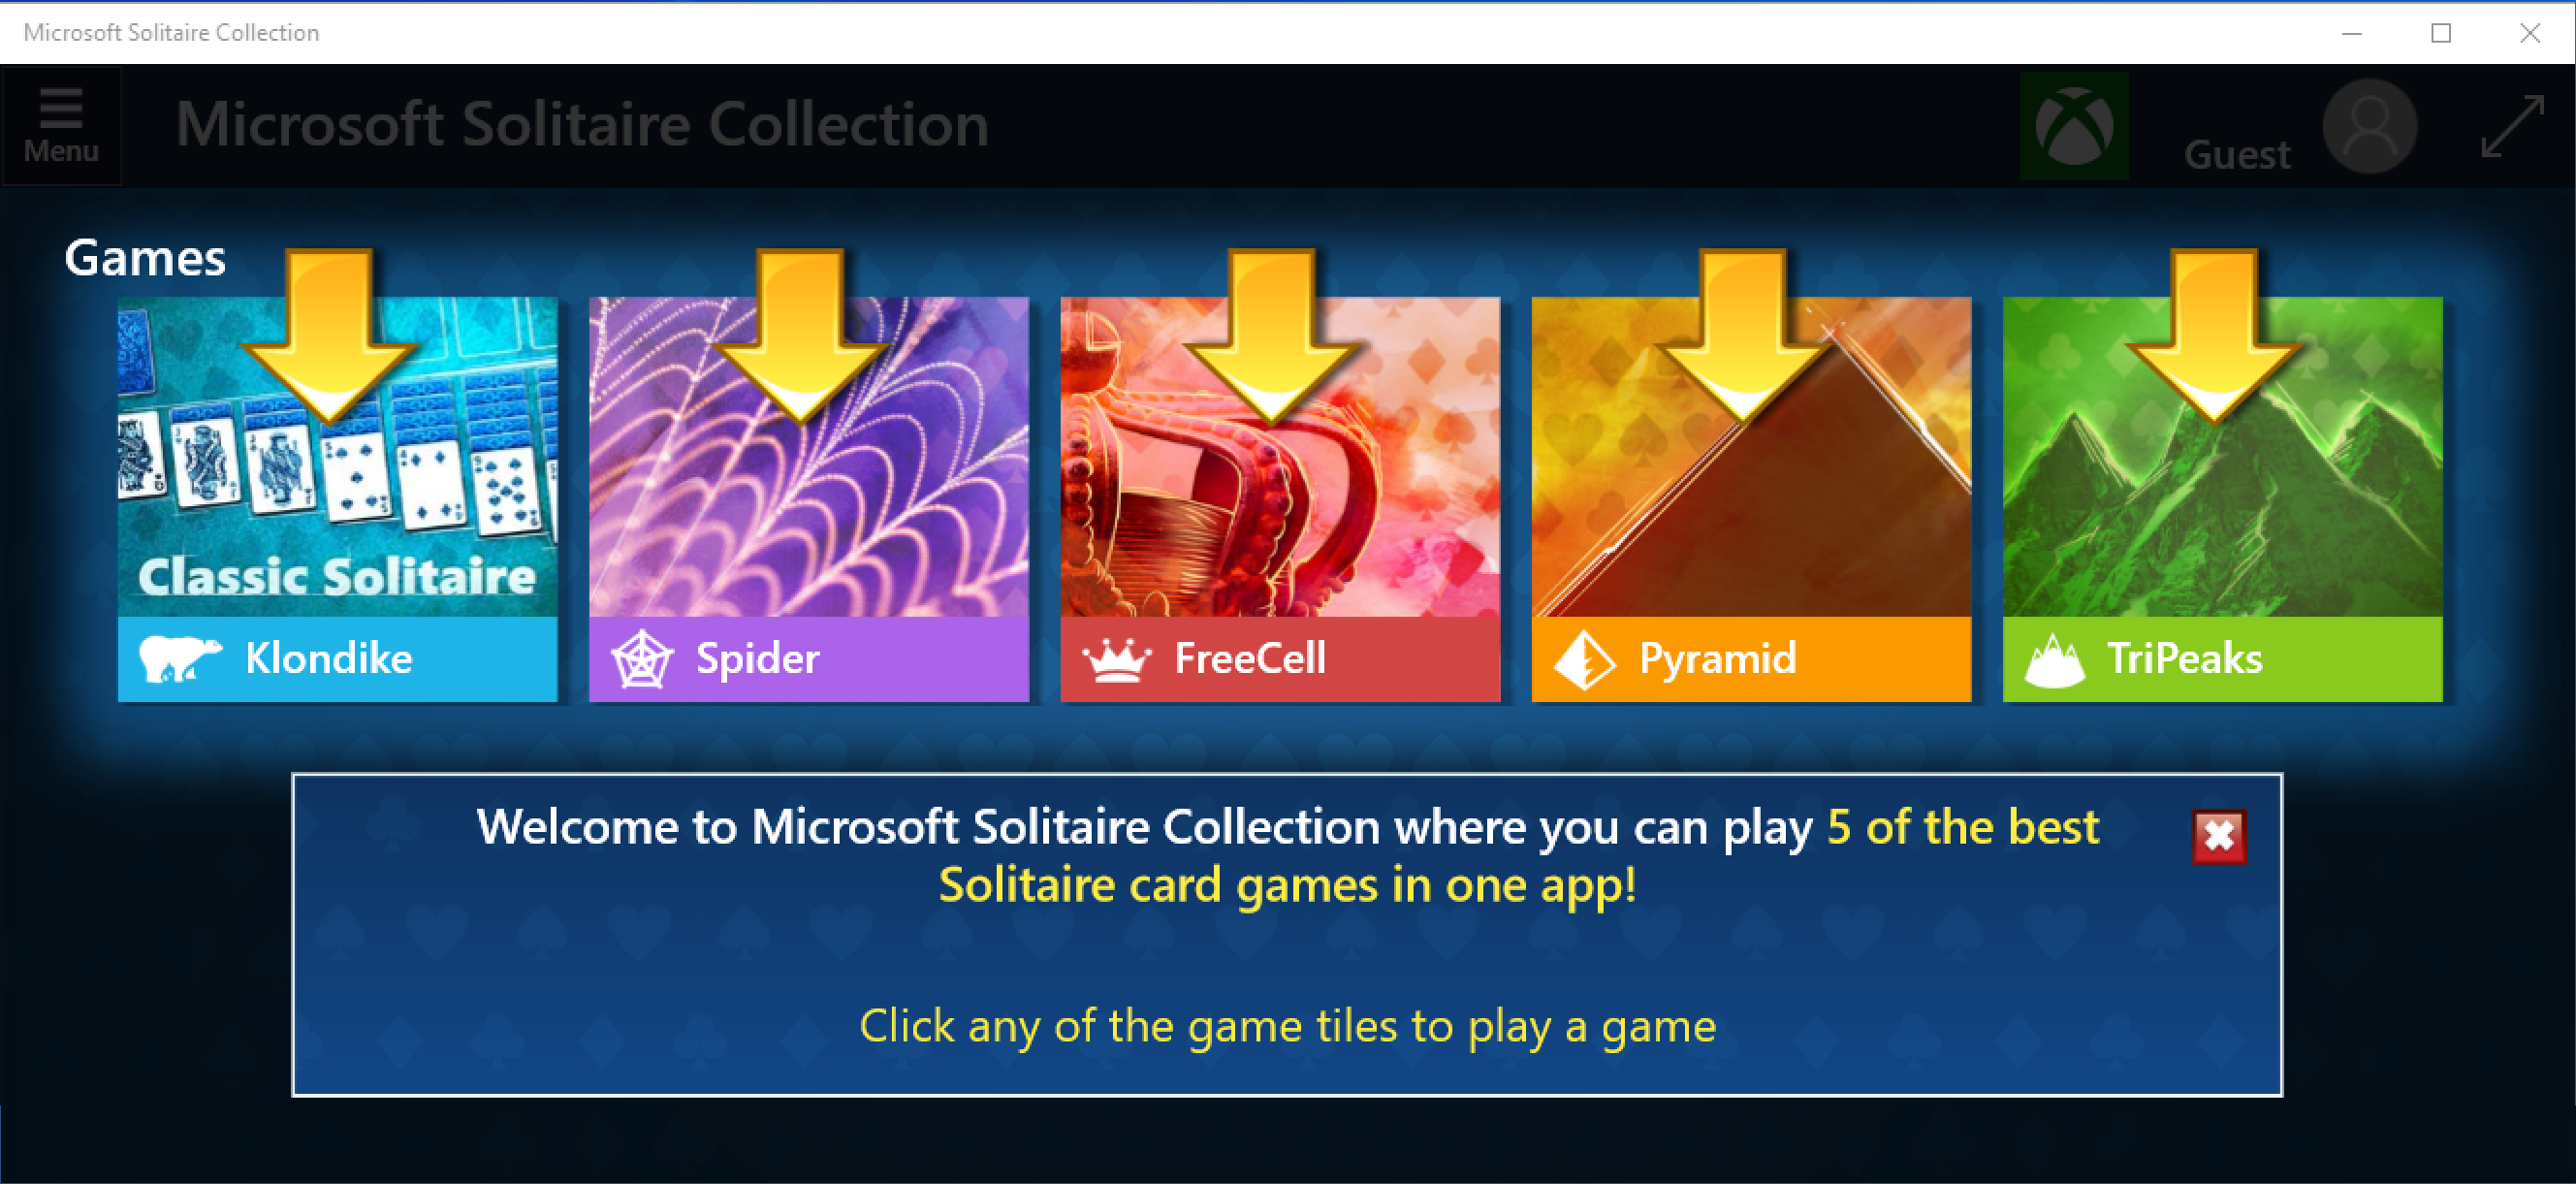 microsoft solitaire collection giving me impossible pyramid levels